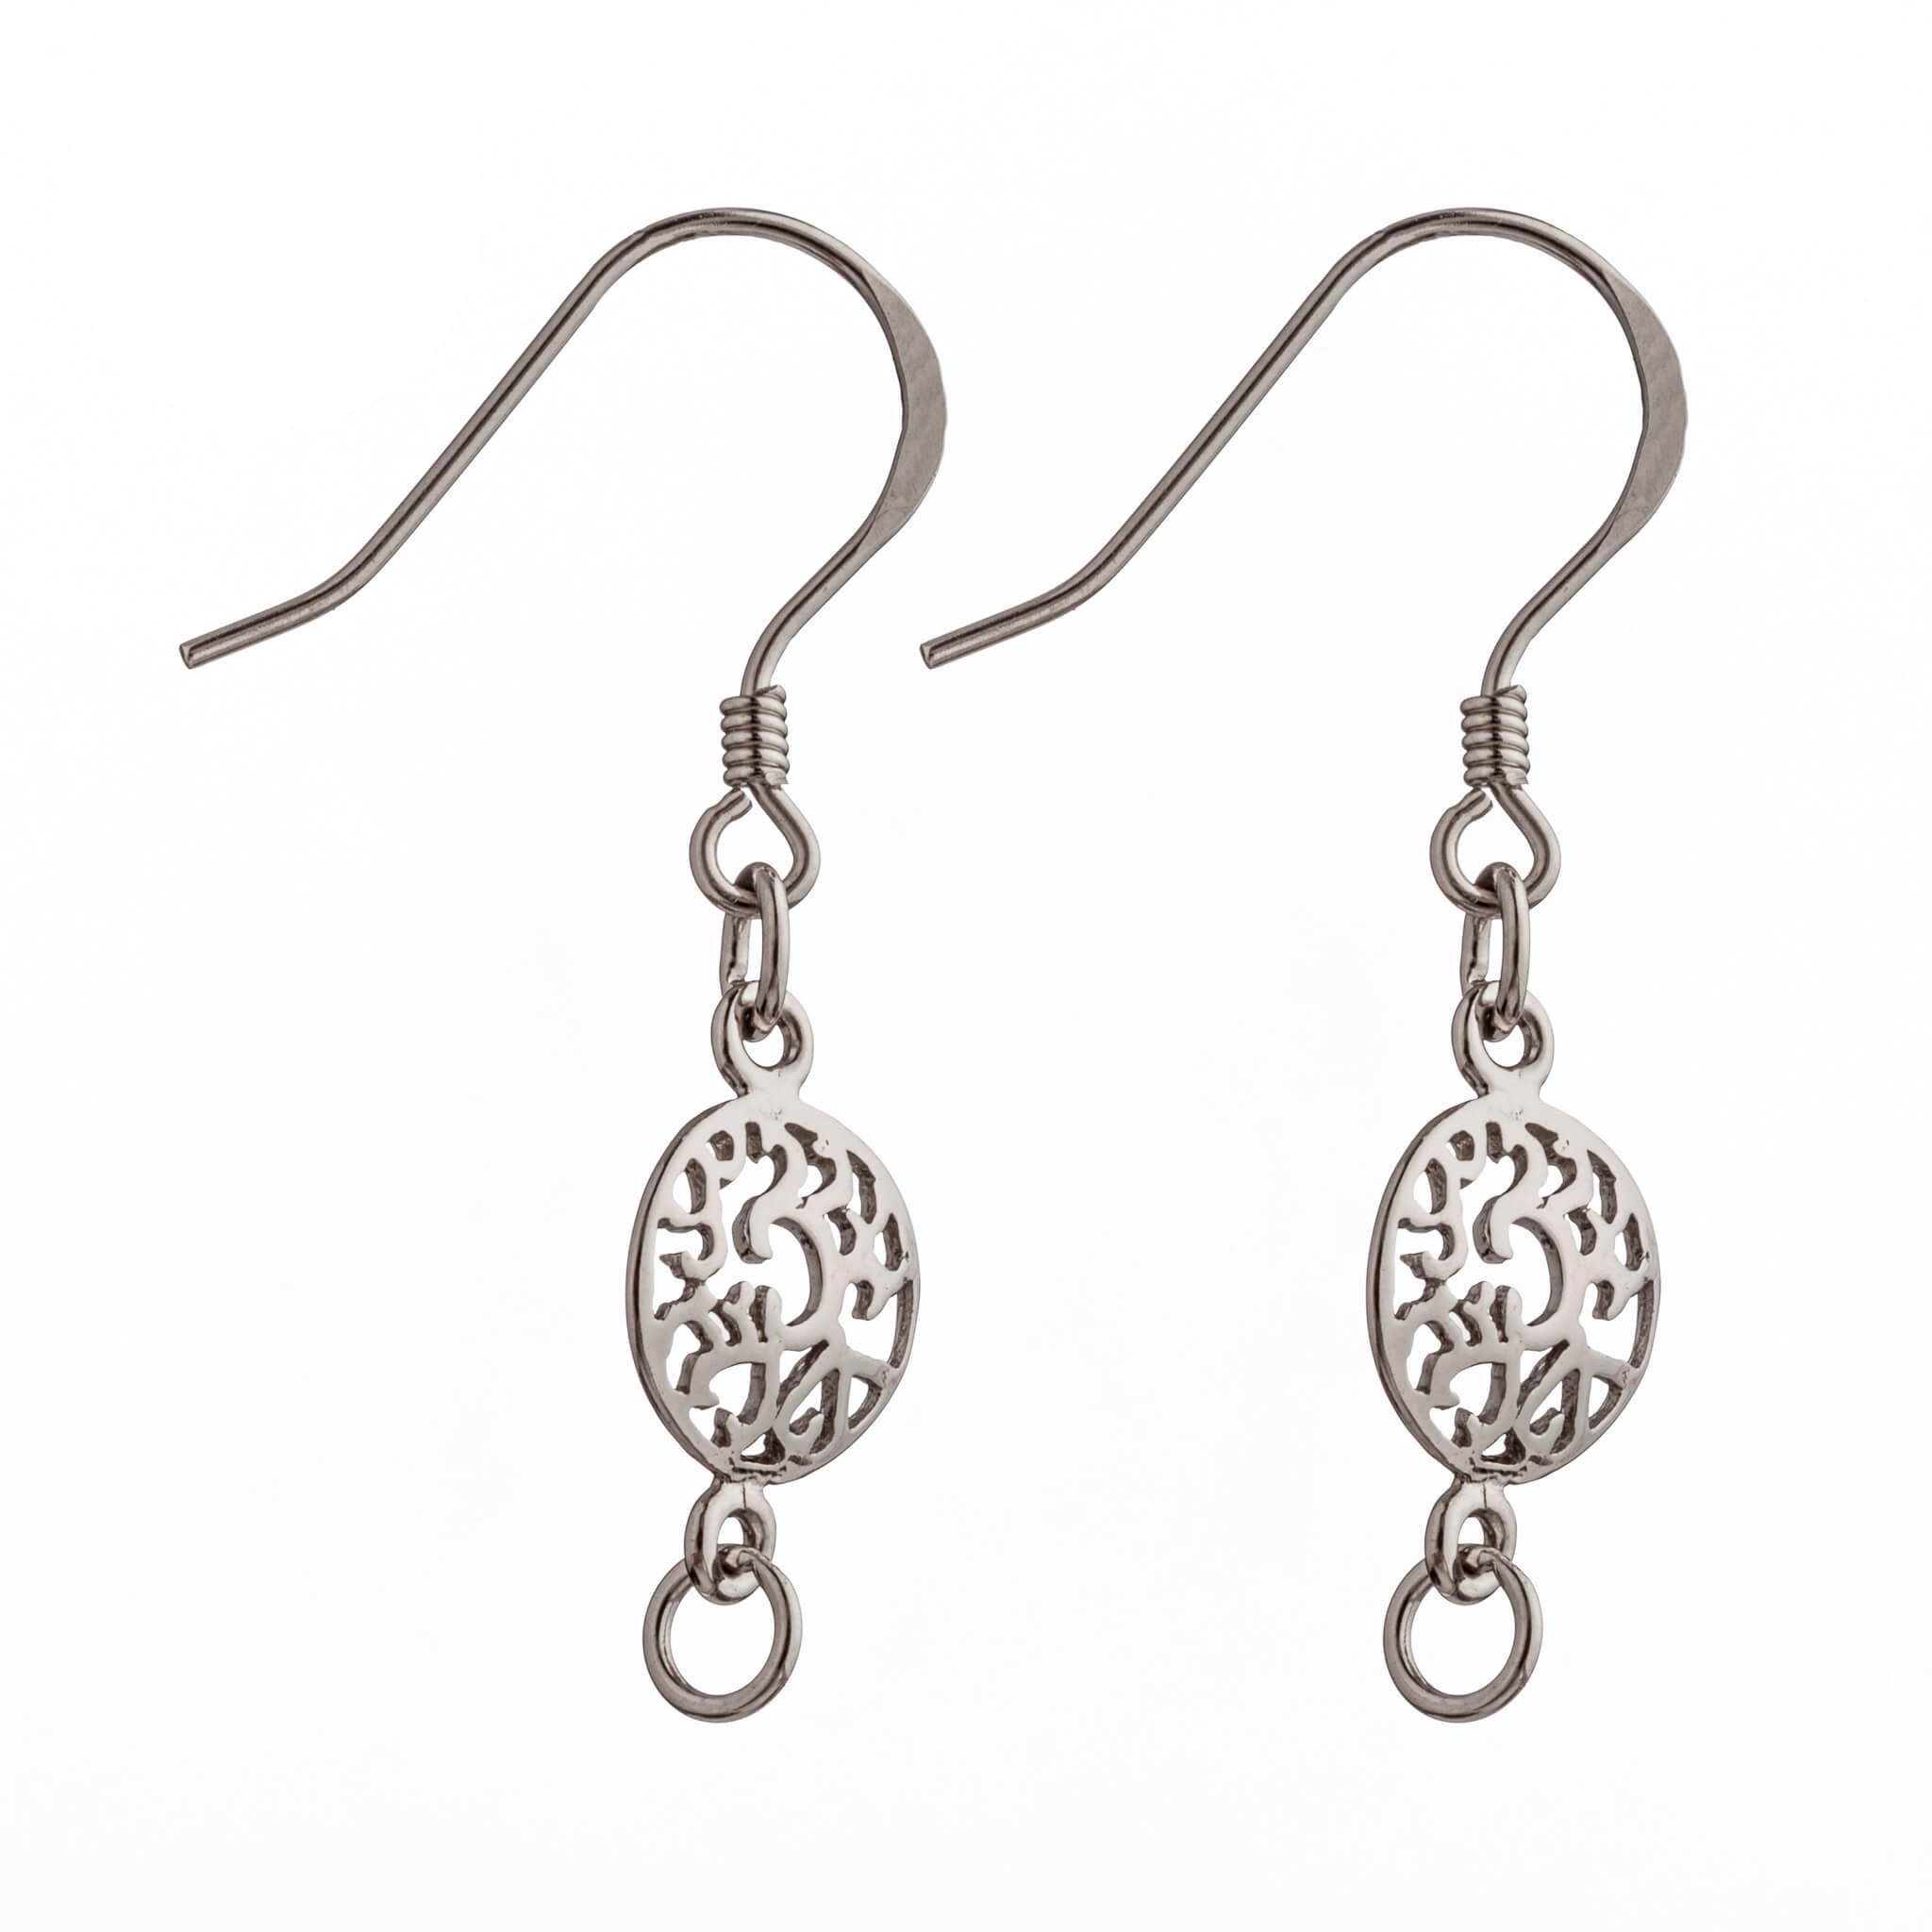 Ear Wires with Frolic Earring Components in Sterling Silver 30.8x8.1x0.7mm